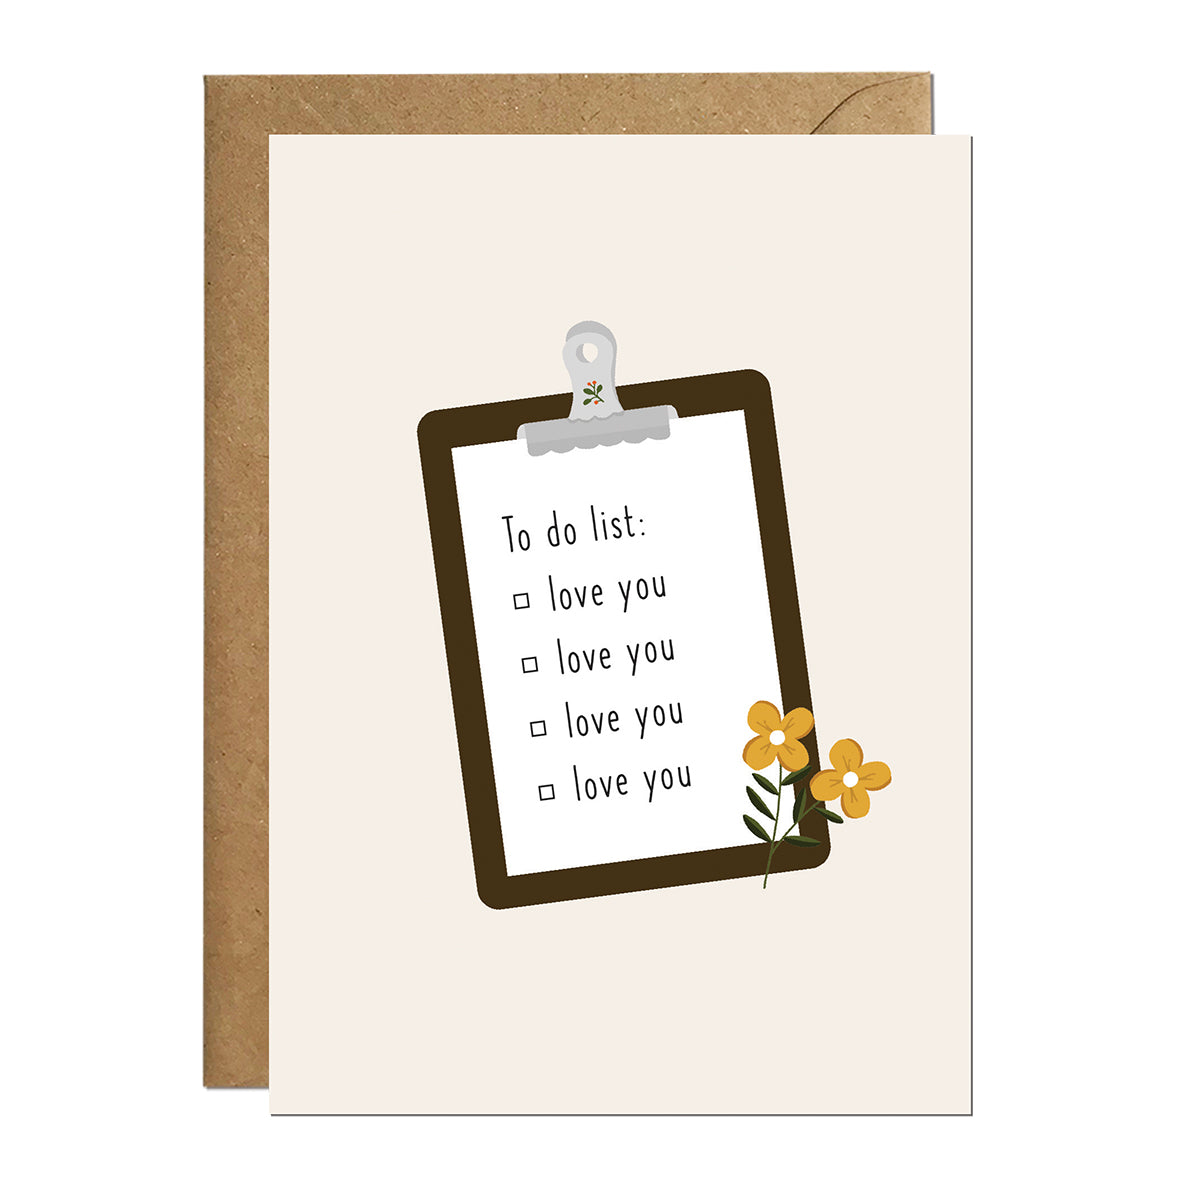 A greeting card with an illustration of a list pad which has a list of to-dos saying 'love you' repeatedly